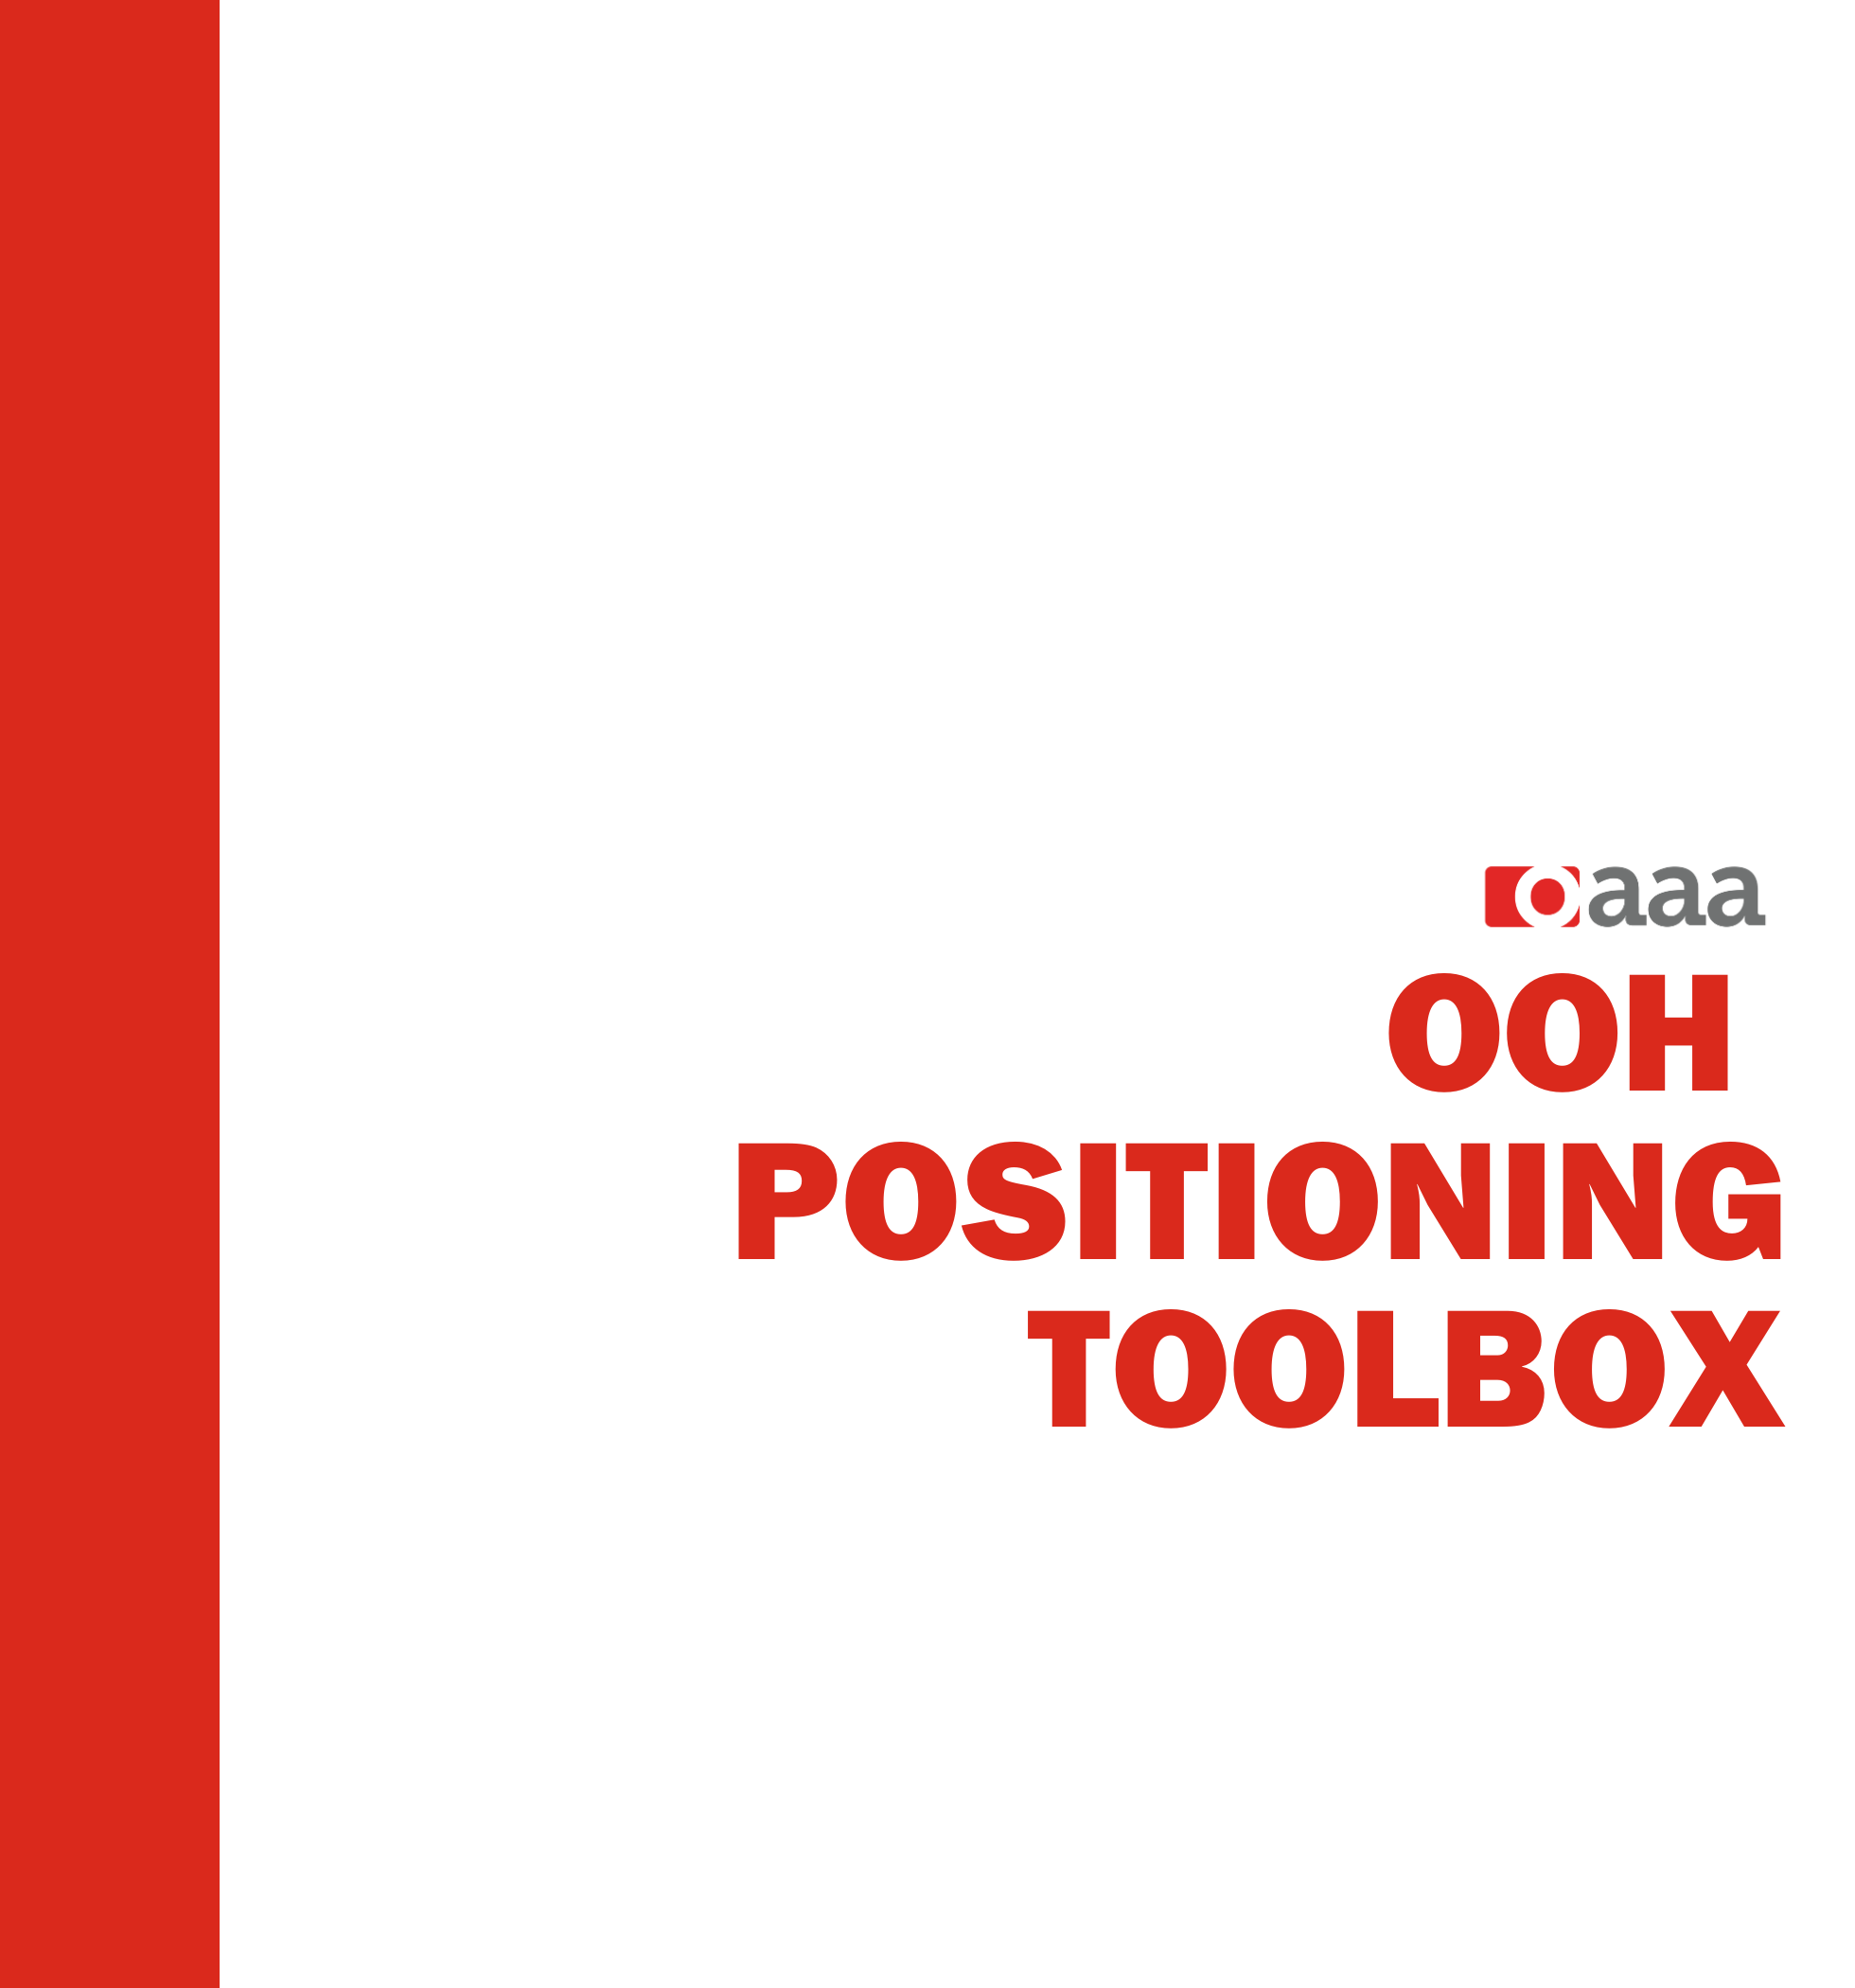 OOH Positioning Toolbox